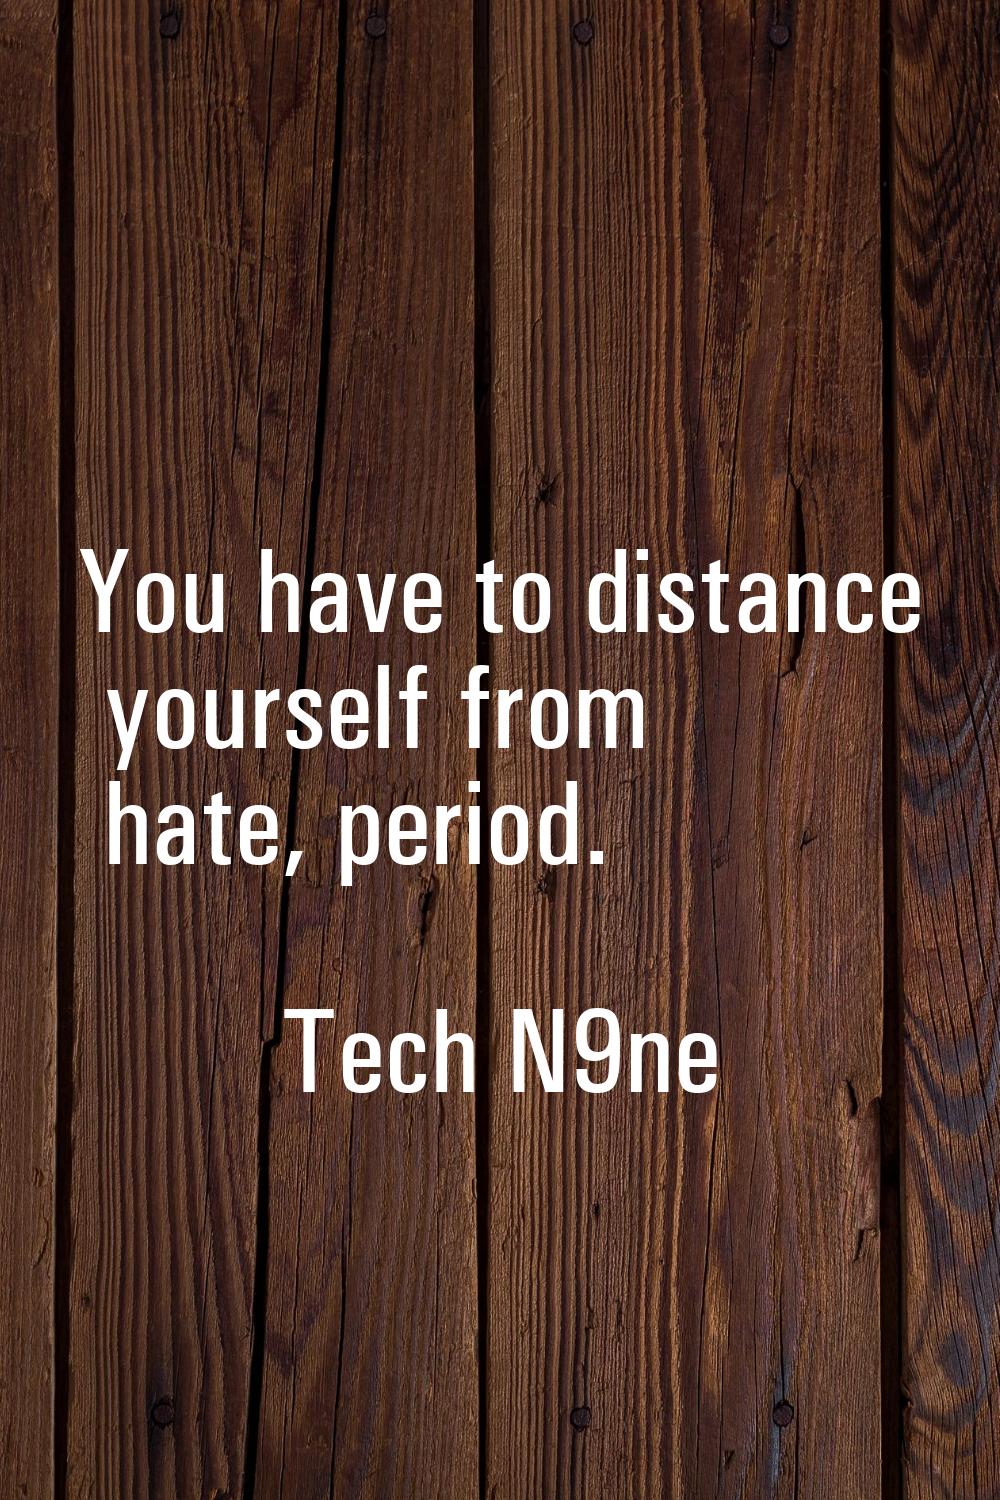 You have to distance yourself from hate, period.